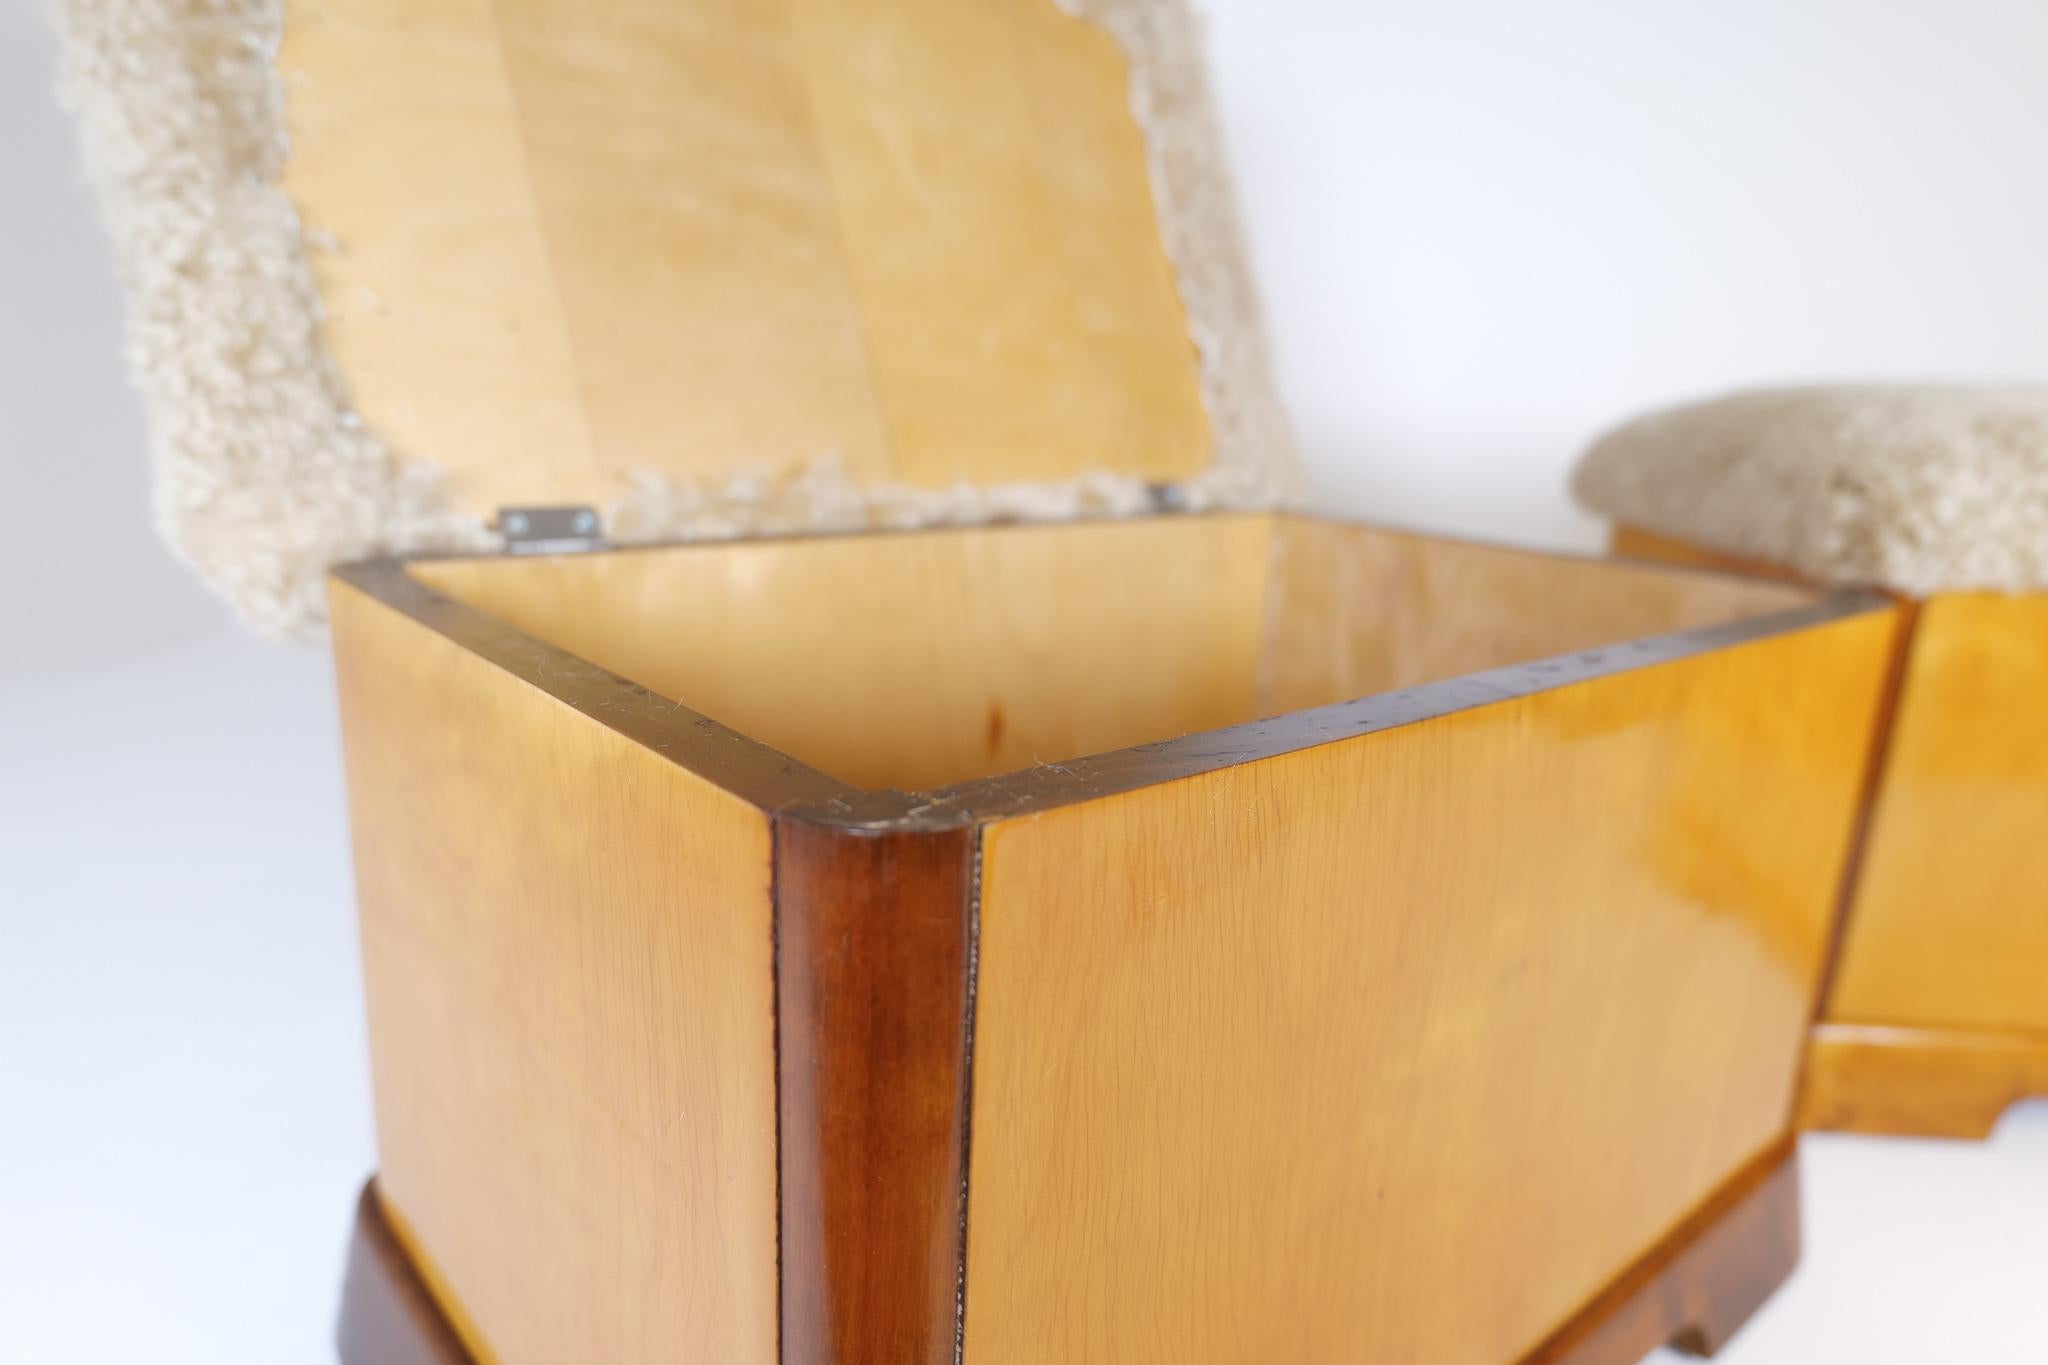 Swedish Art Deco Stools in Lacquered Birch and Sheepskin/Shearling Seat 1940s For Sale 6